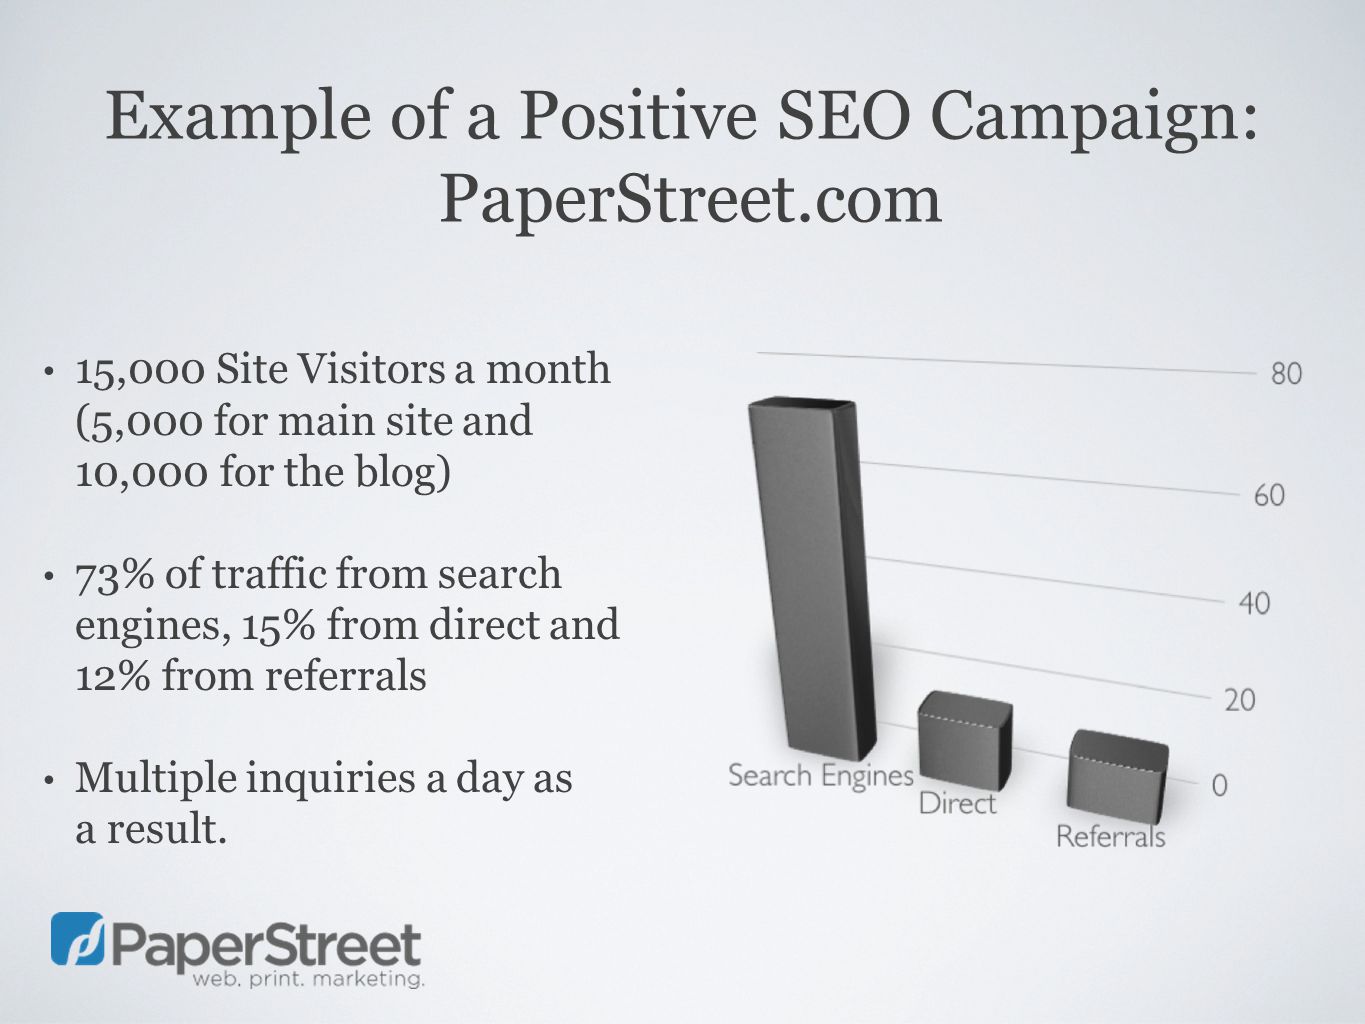 Example of a Positive SEO Campaign: PaperStreet.com 15,000 Site Visitors a month (5,000 for main site and 10,000 for the blog) 73% of traffic from search engines, 15% from direct and 12% from referrals Multiple inquiries a day as a result.